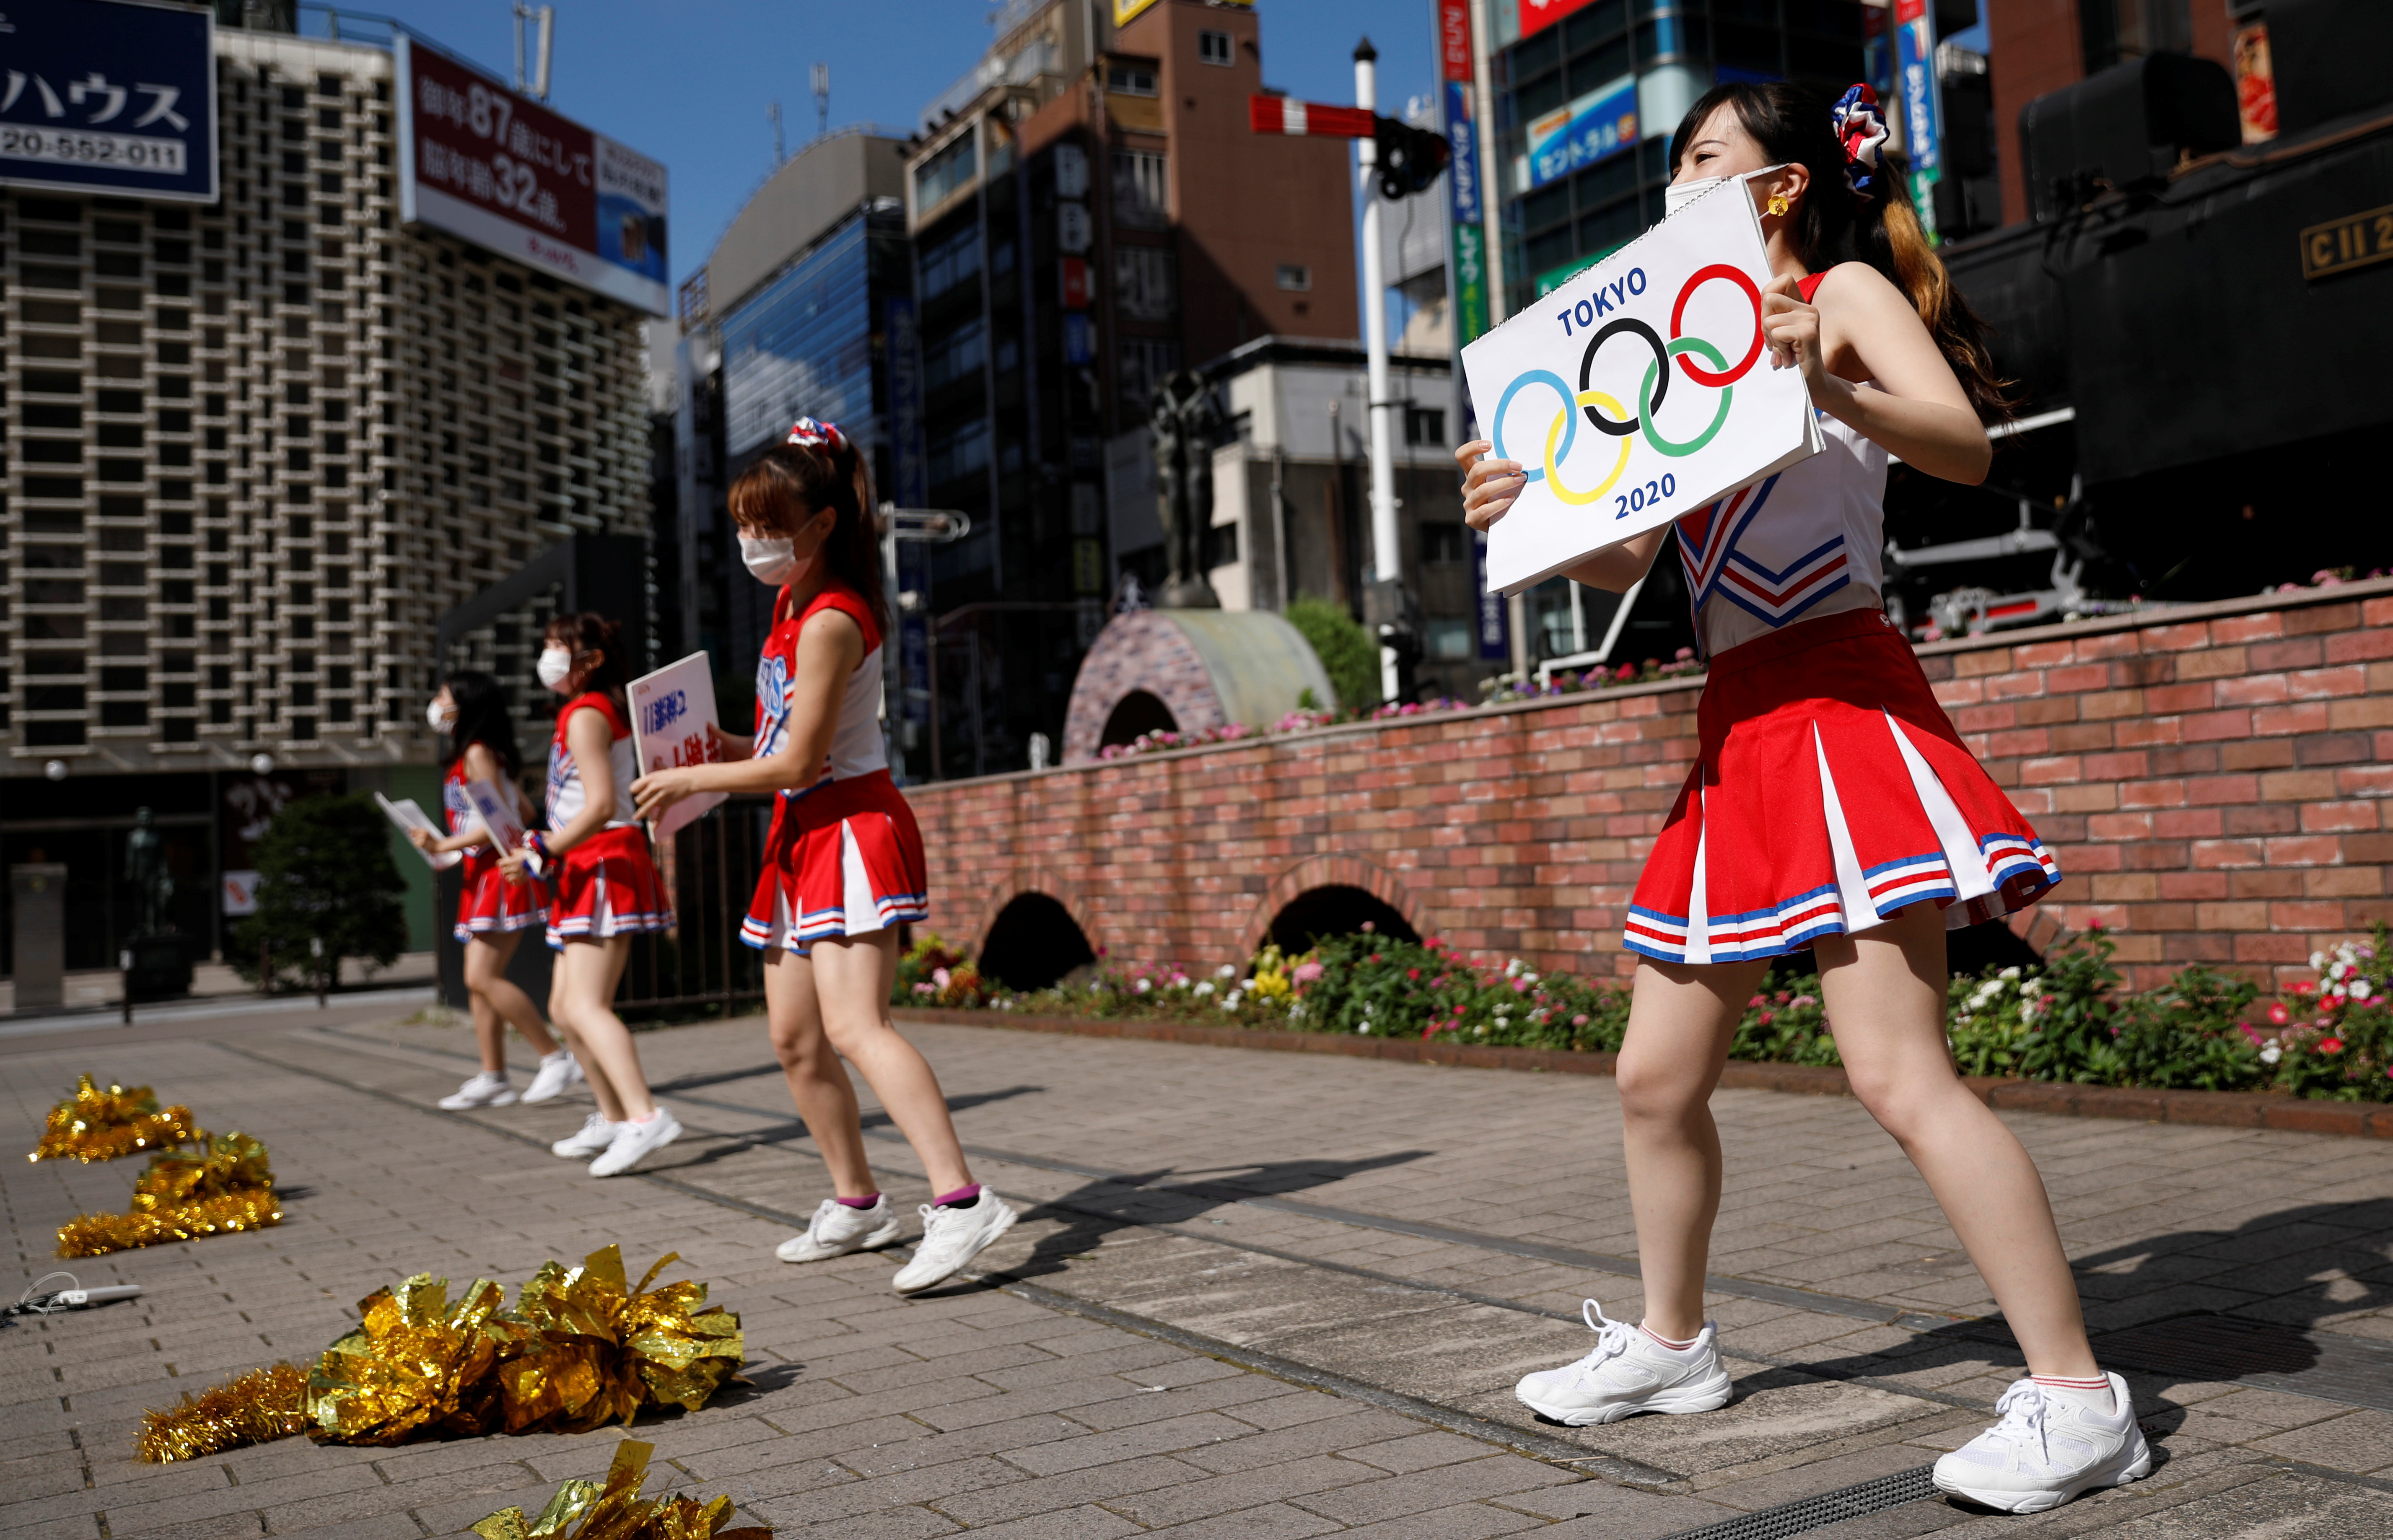 Fight!': Japan cheerleaders root for athletes as Games set to open Reuters